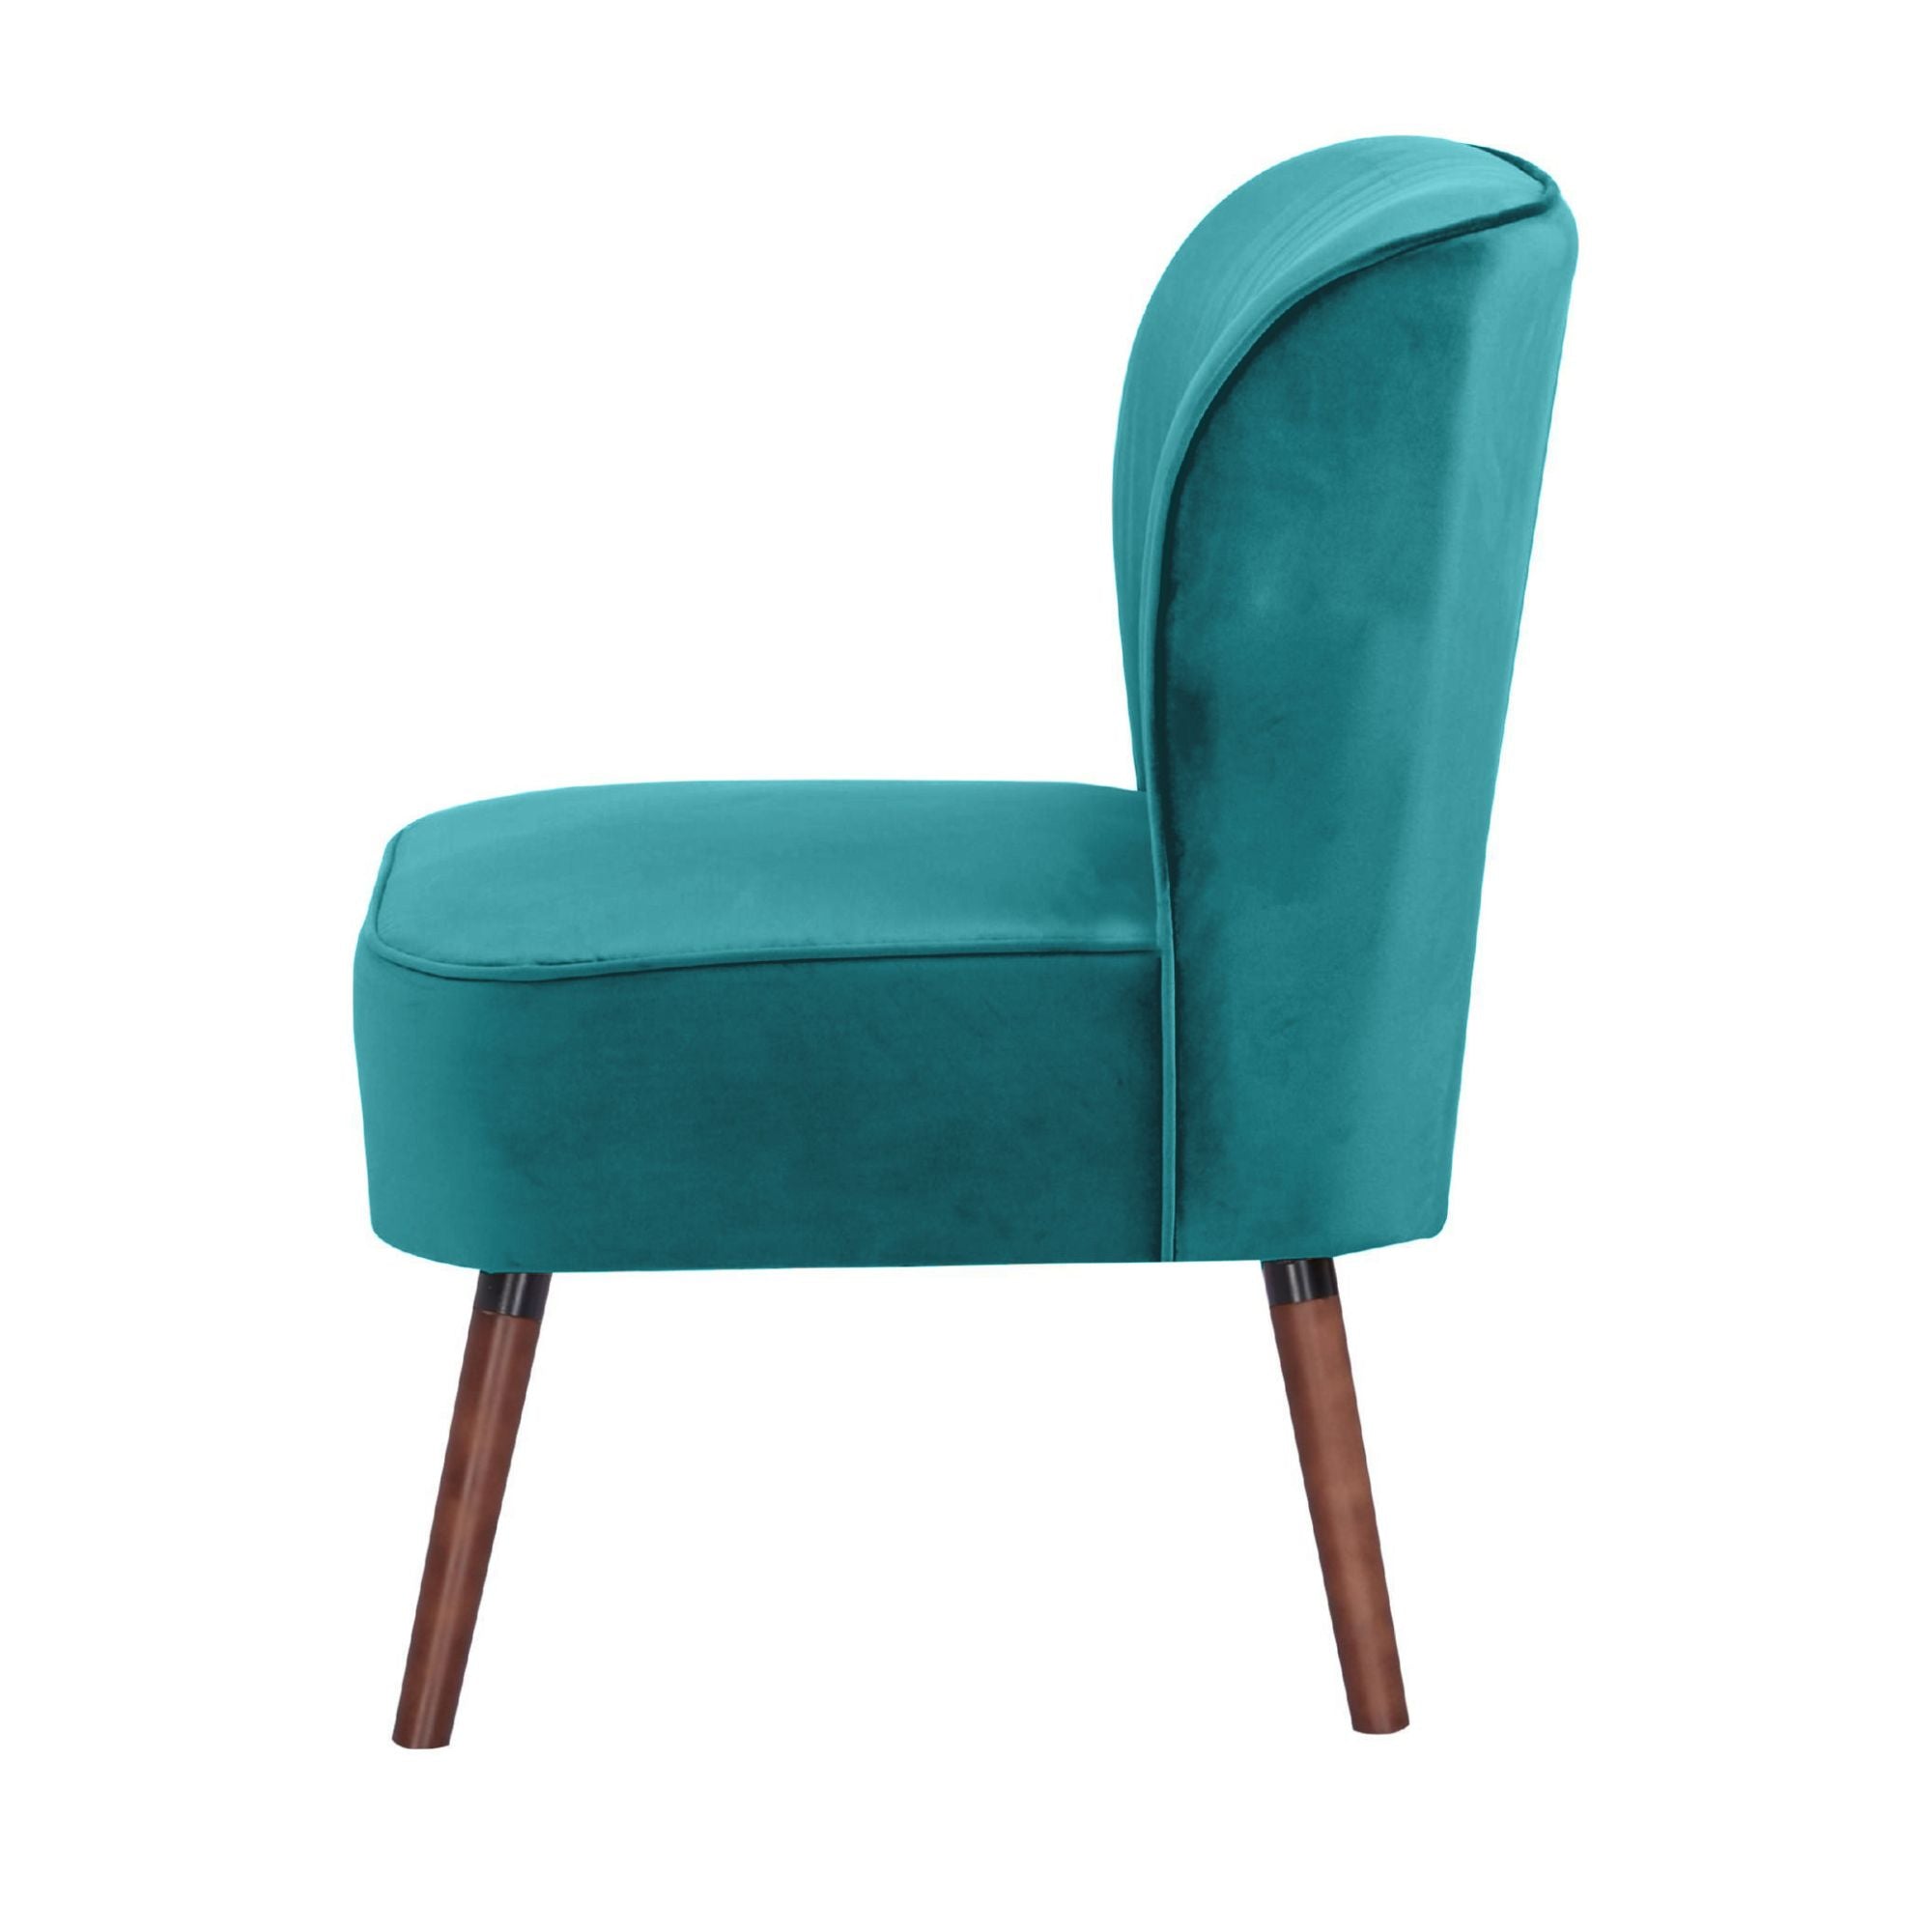 Mid Blue Upholstered Accent Chair, Durable Wooden Frame